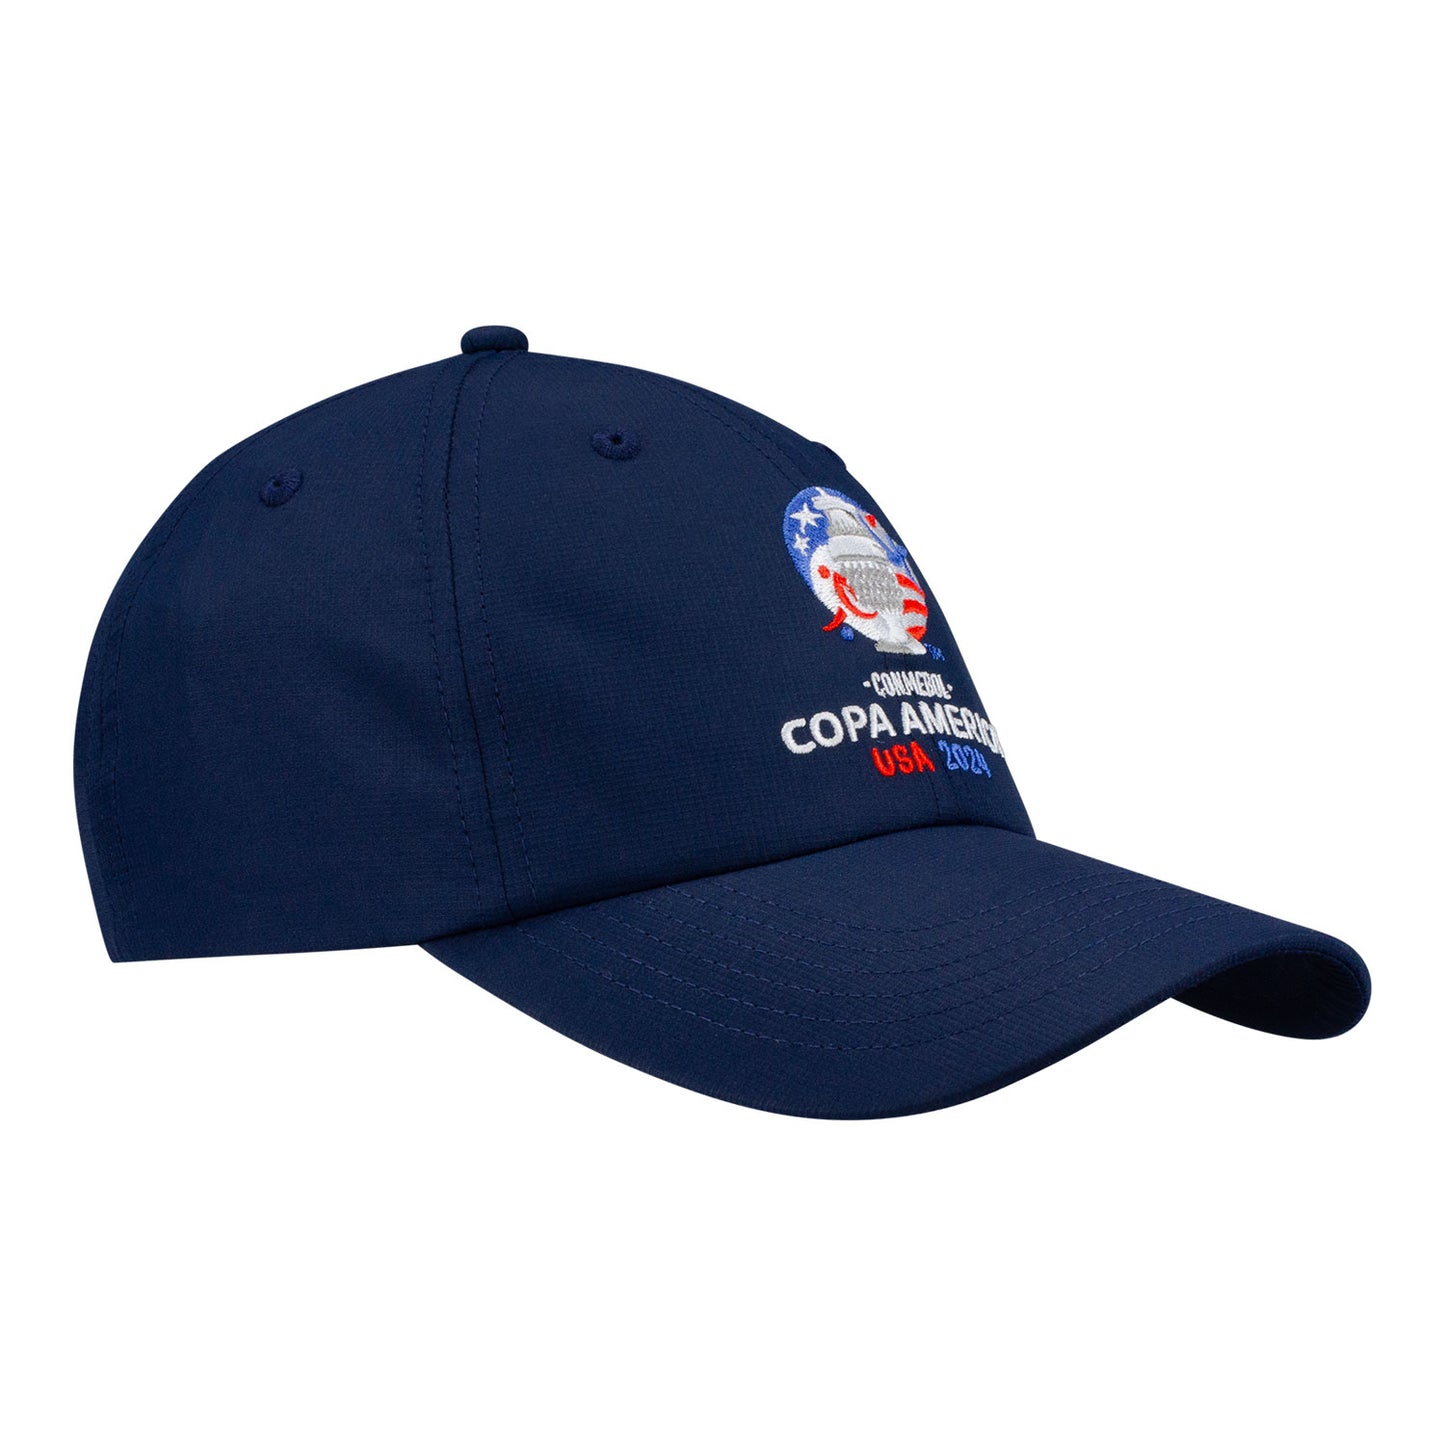 Copa America Navy Embroidered Adjustable Hat